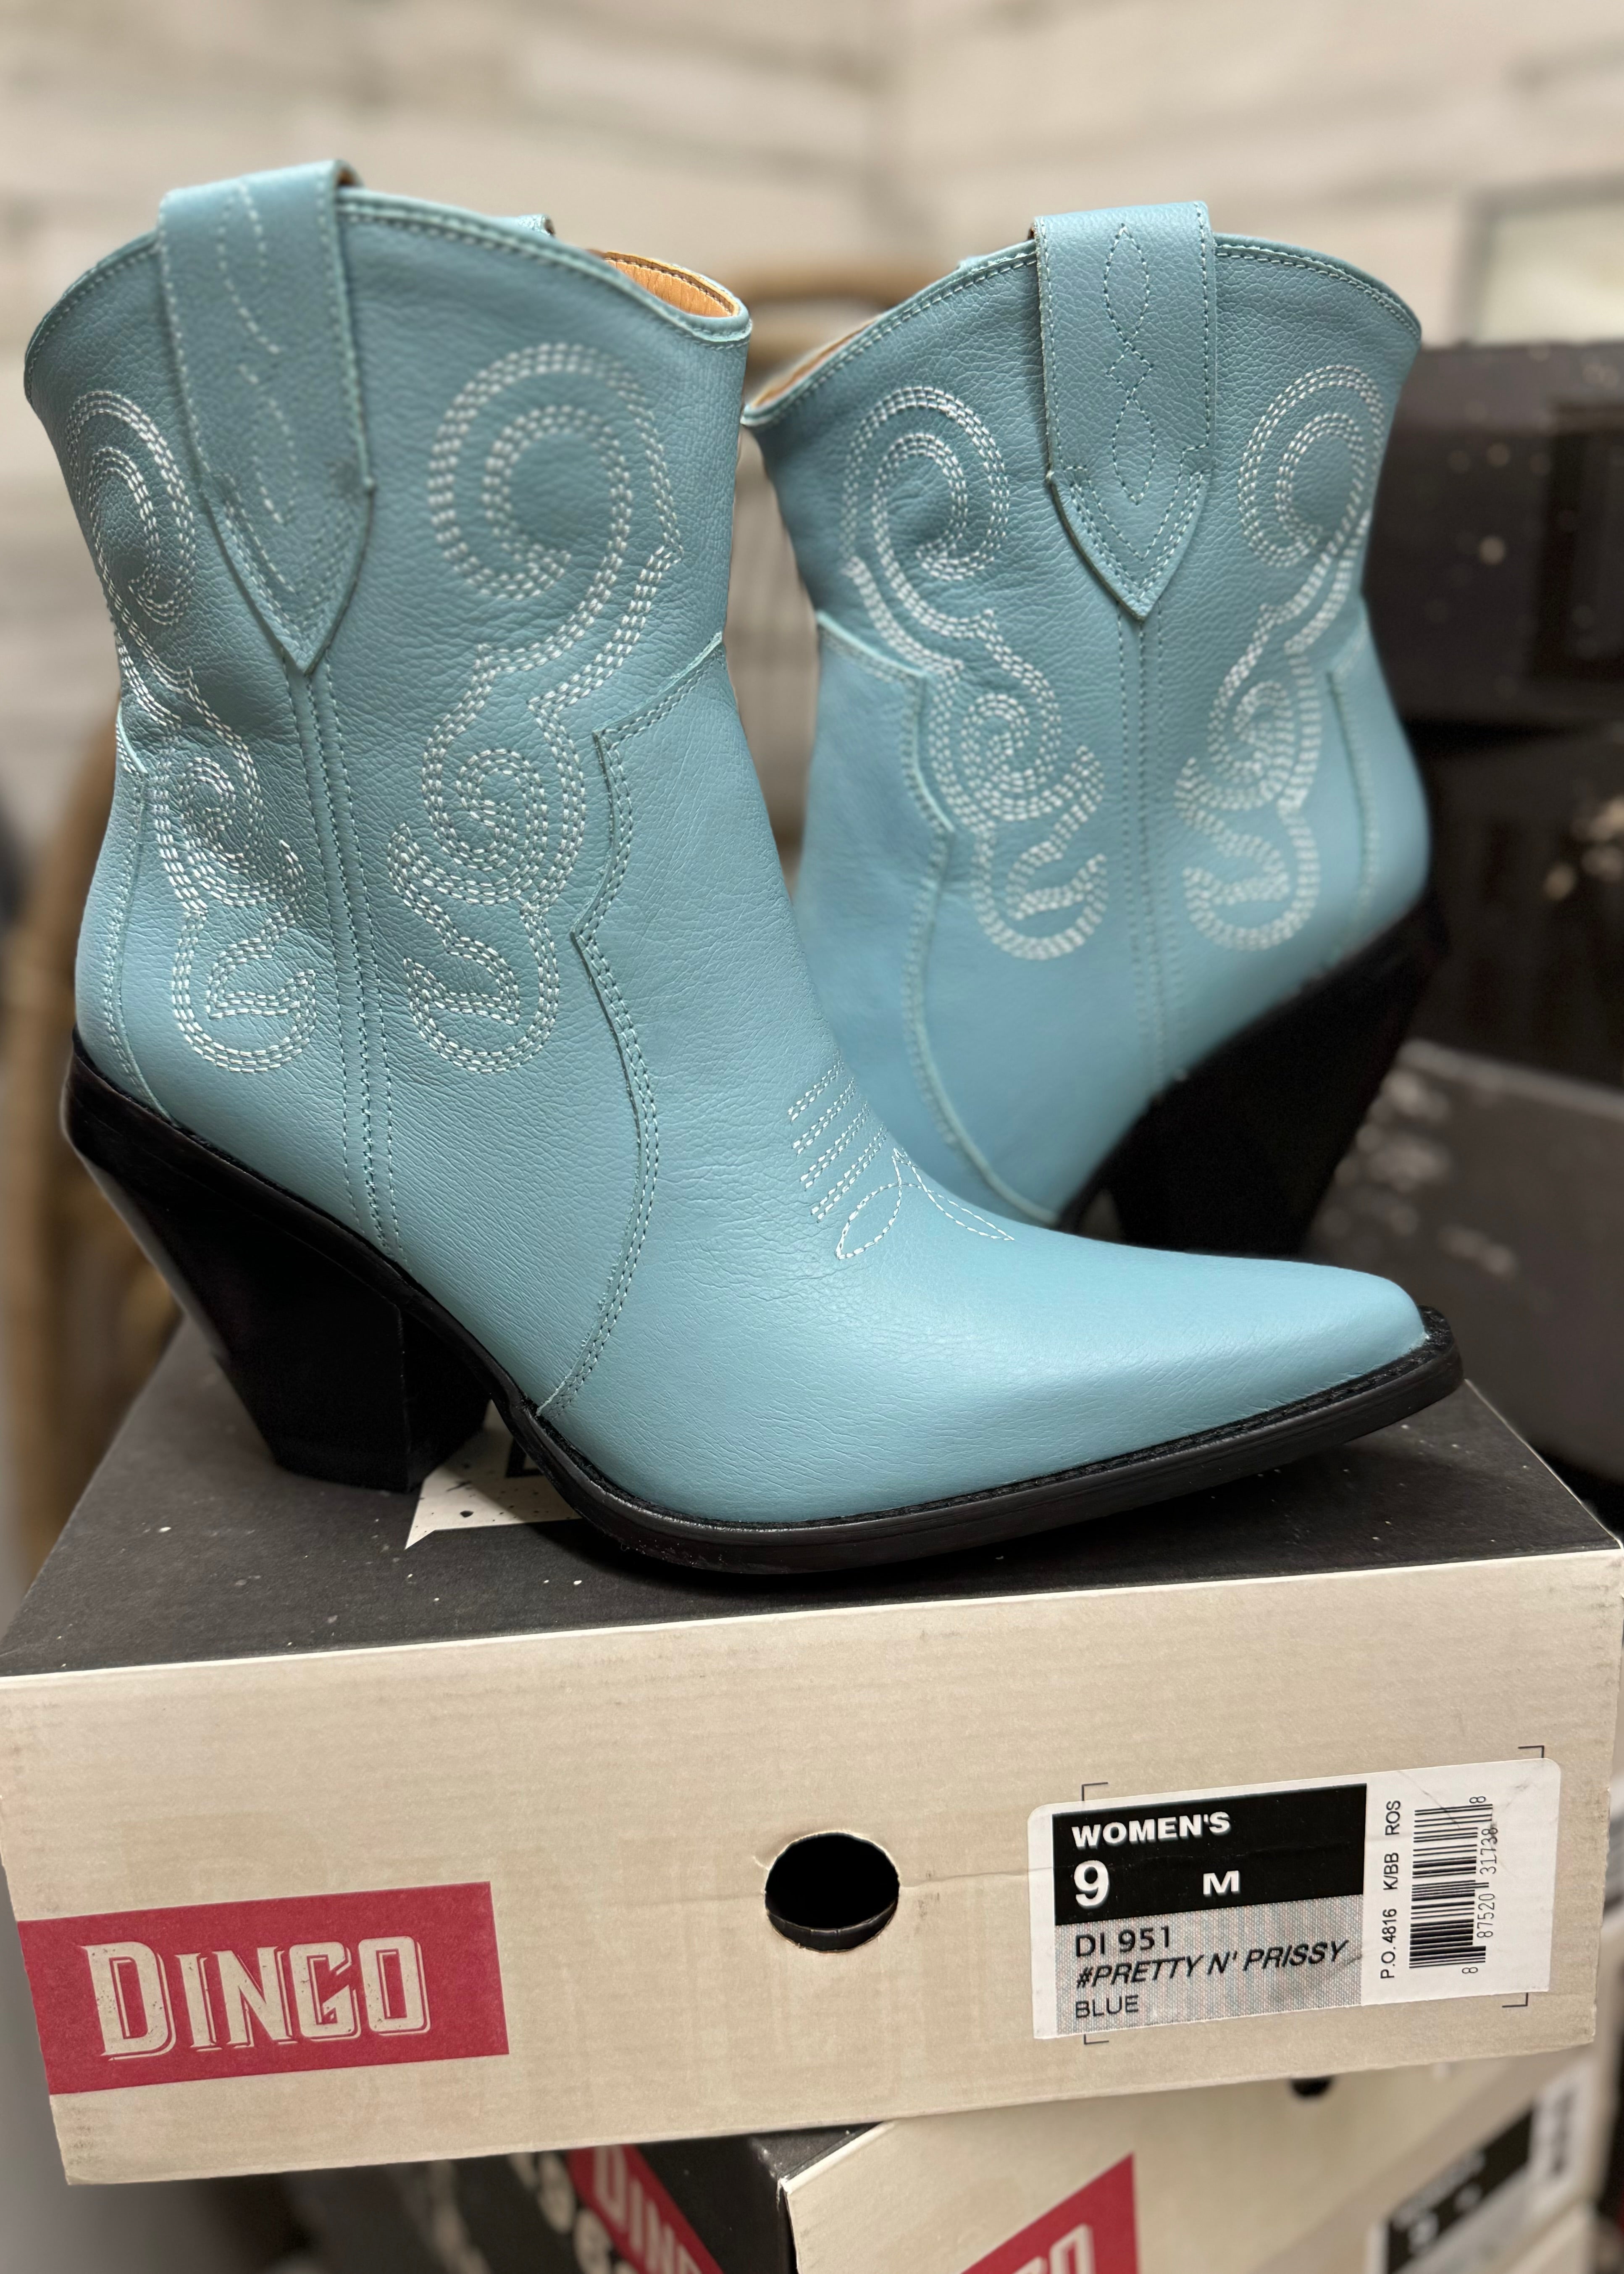 Model Shoes Size 9 | Dingo | Pretty N Prissy Leather Bootie in Blue *DISCONTINUED* - Giddy Up Glamour Boutique